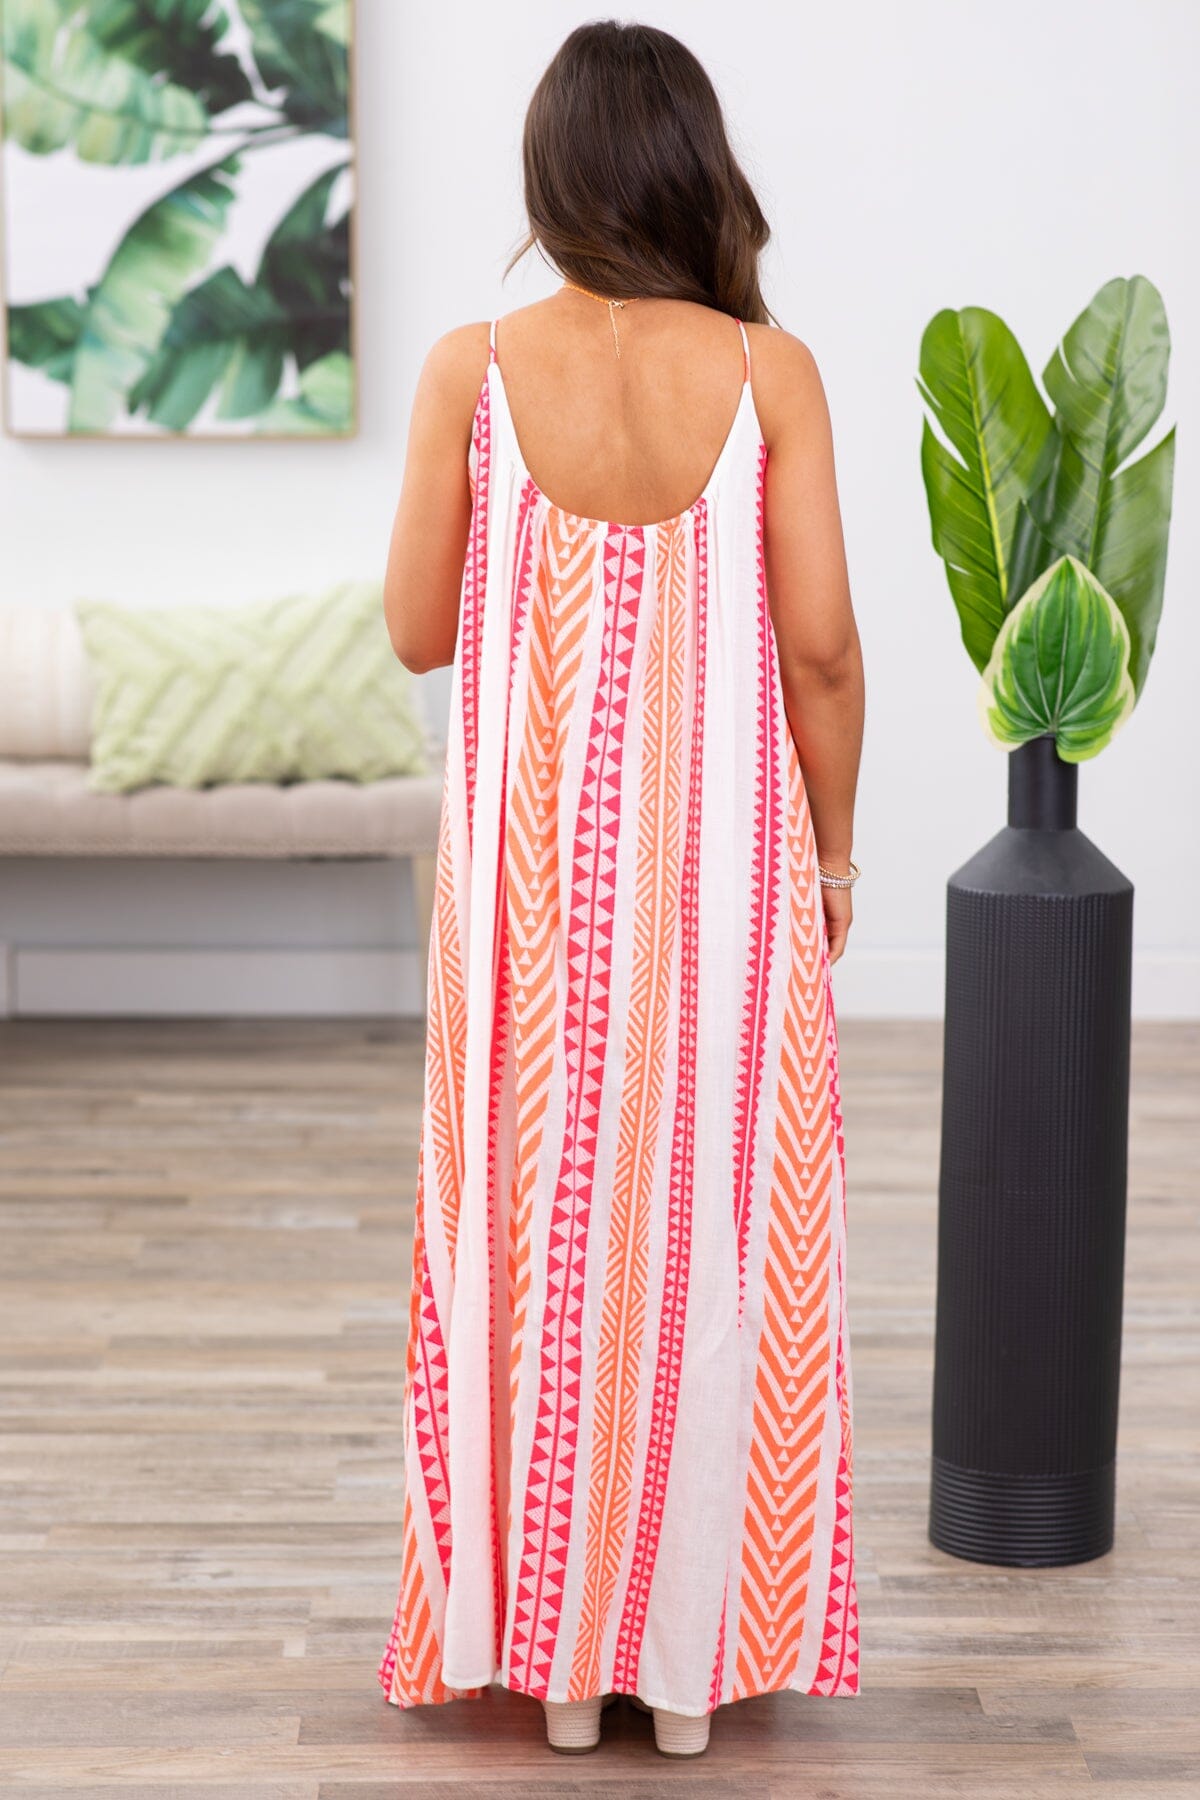 Neon Pink and Neon Orange Geometric Maxi Dress - Filly Flair